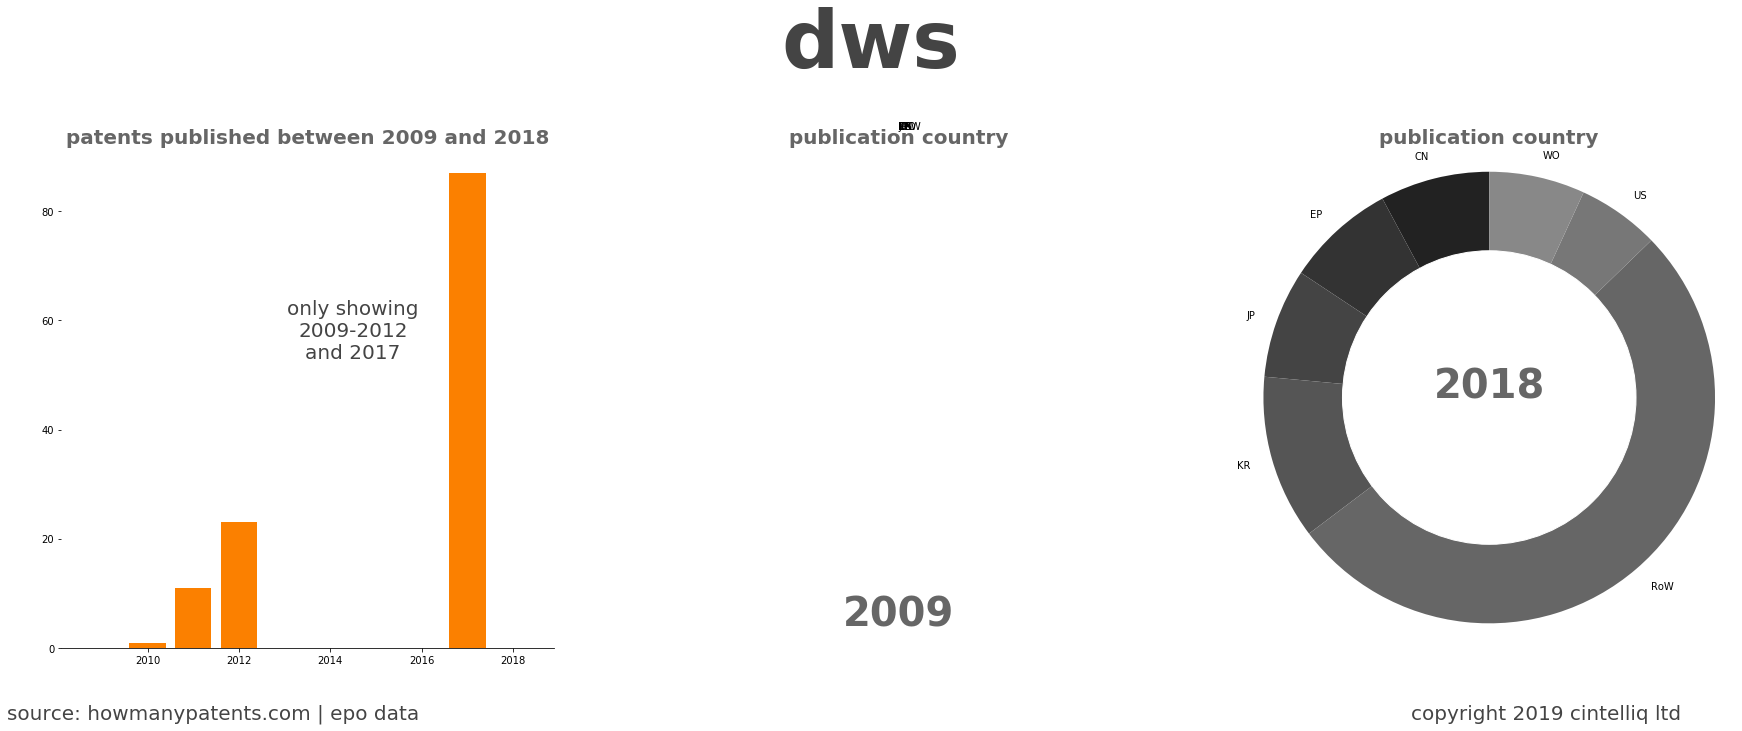 summary of patents for Dws